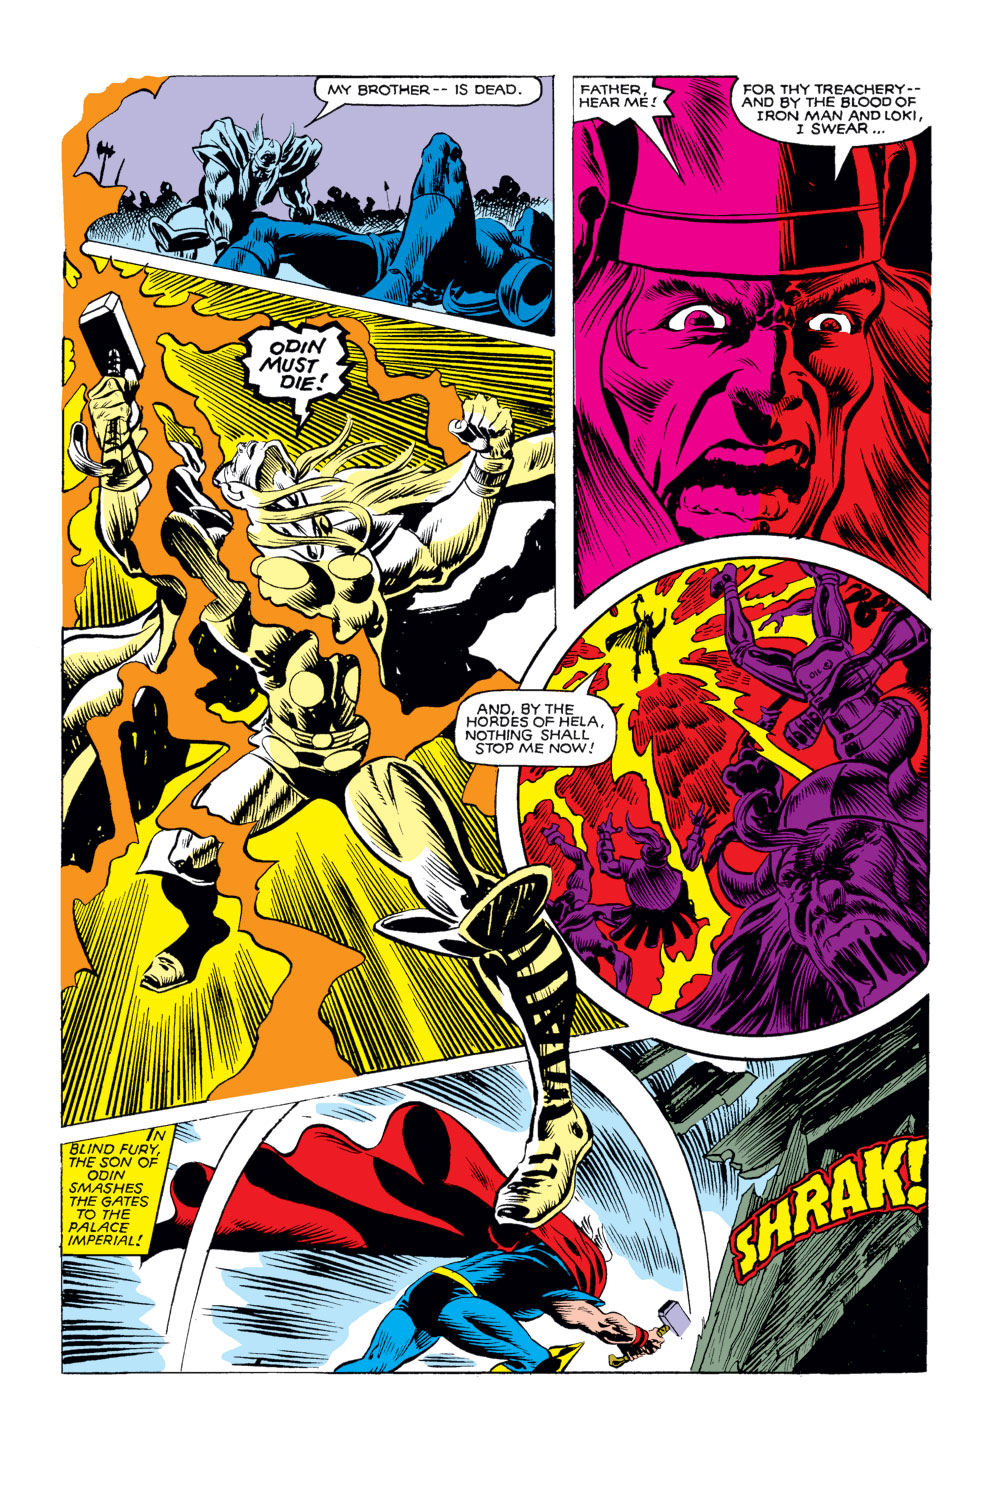 What If? (1977) issue 25 - Thor and the Avengers battled the gods - Page 28